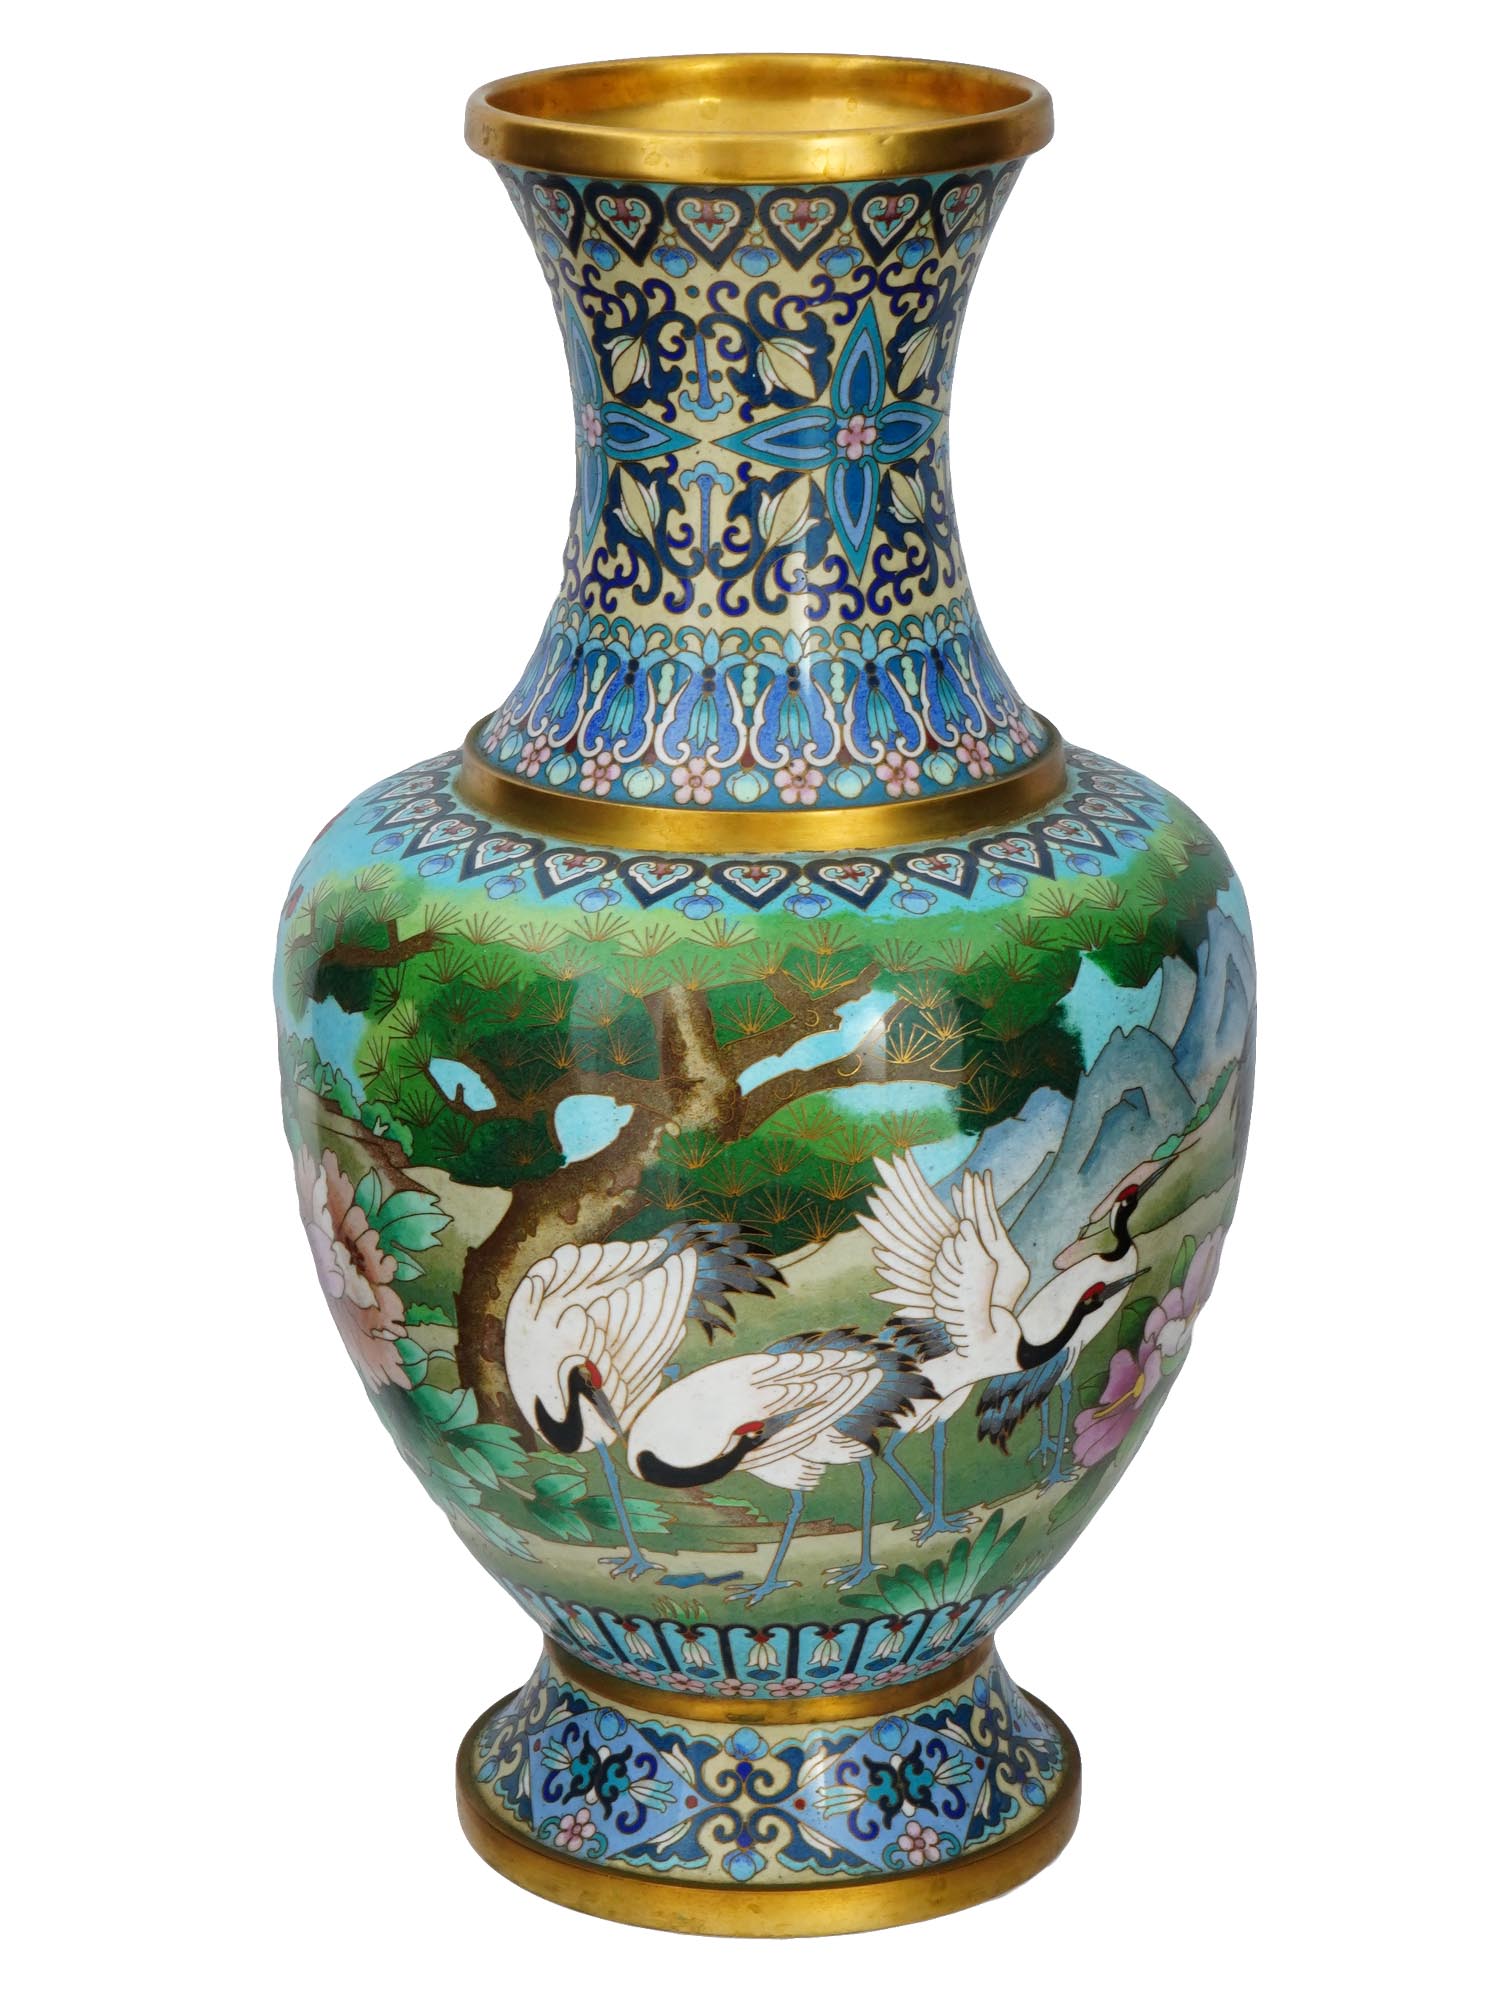 ANTIQUE CHINESE QING CLOISONNE ENAMEL VASE WITH BIRDS PIC-3